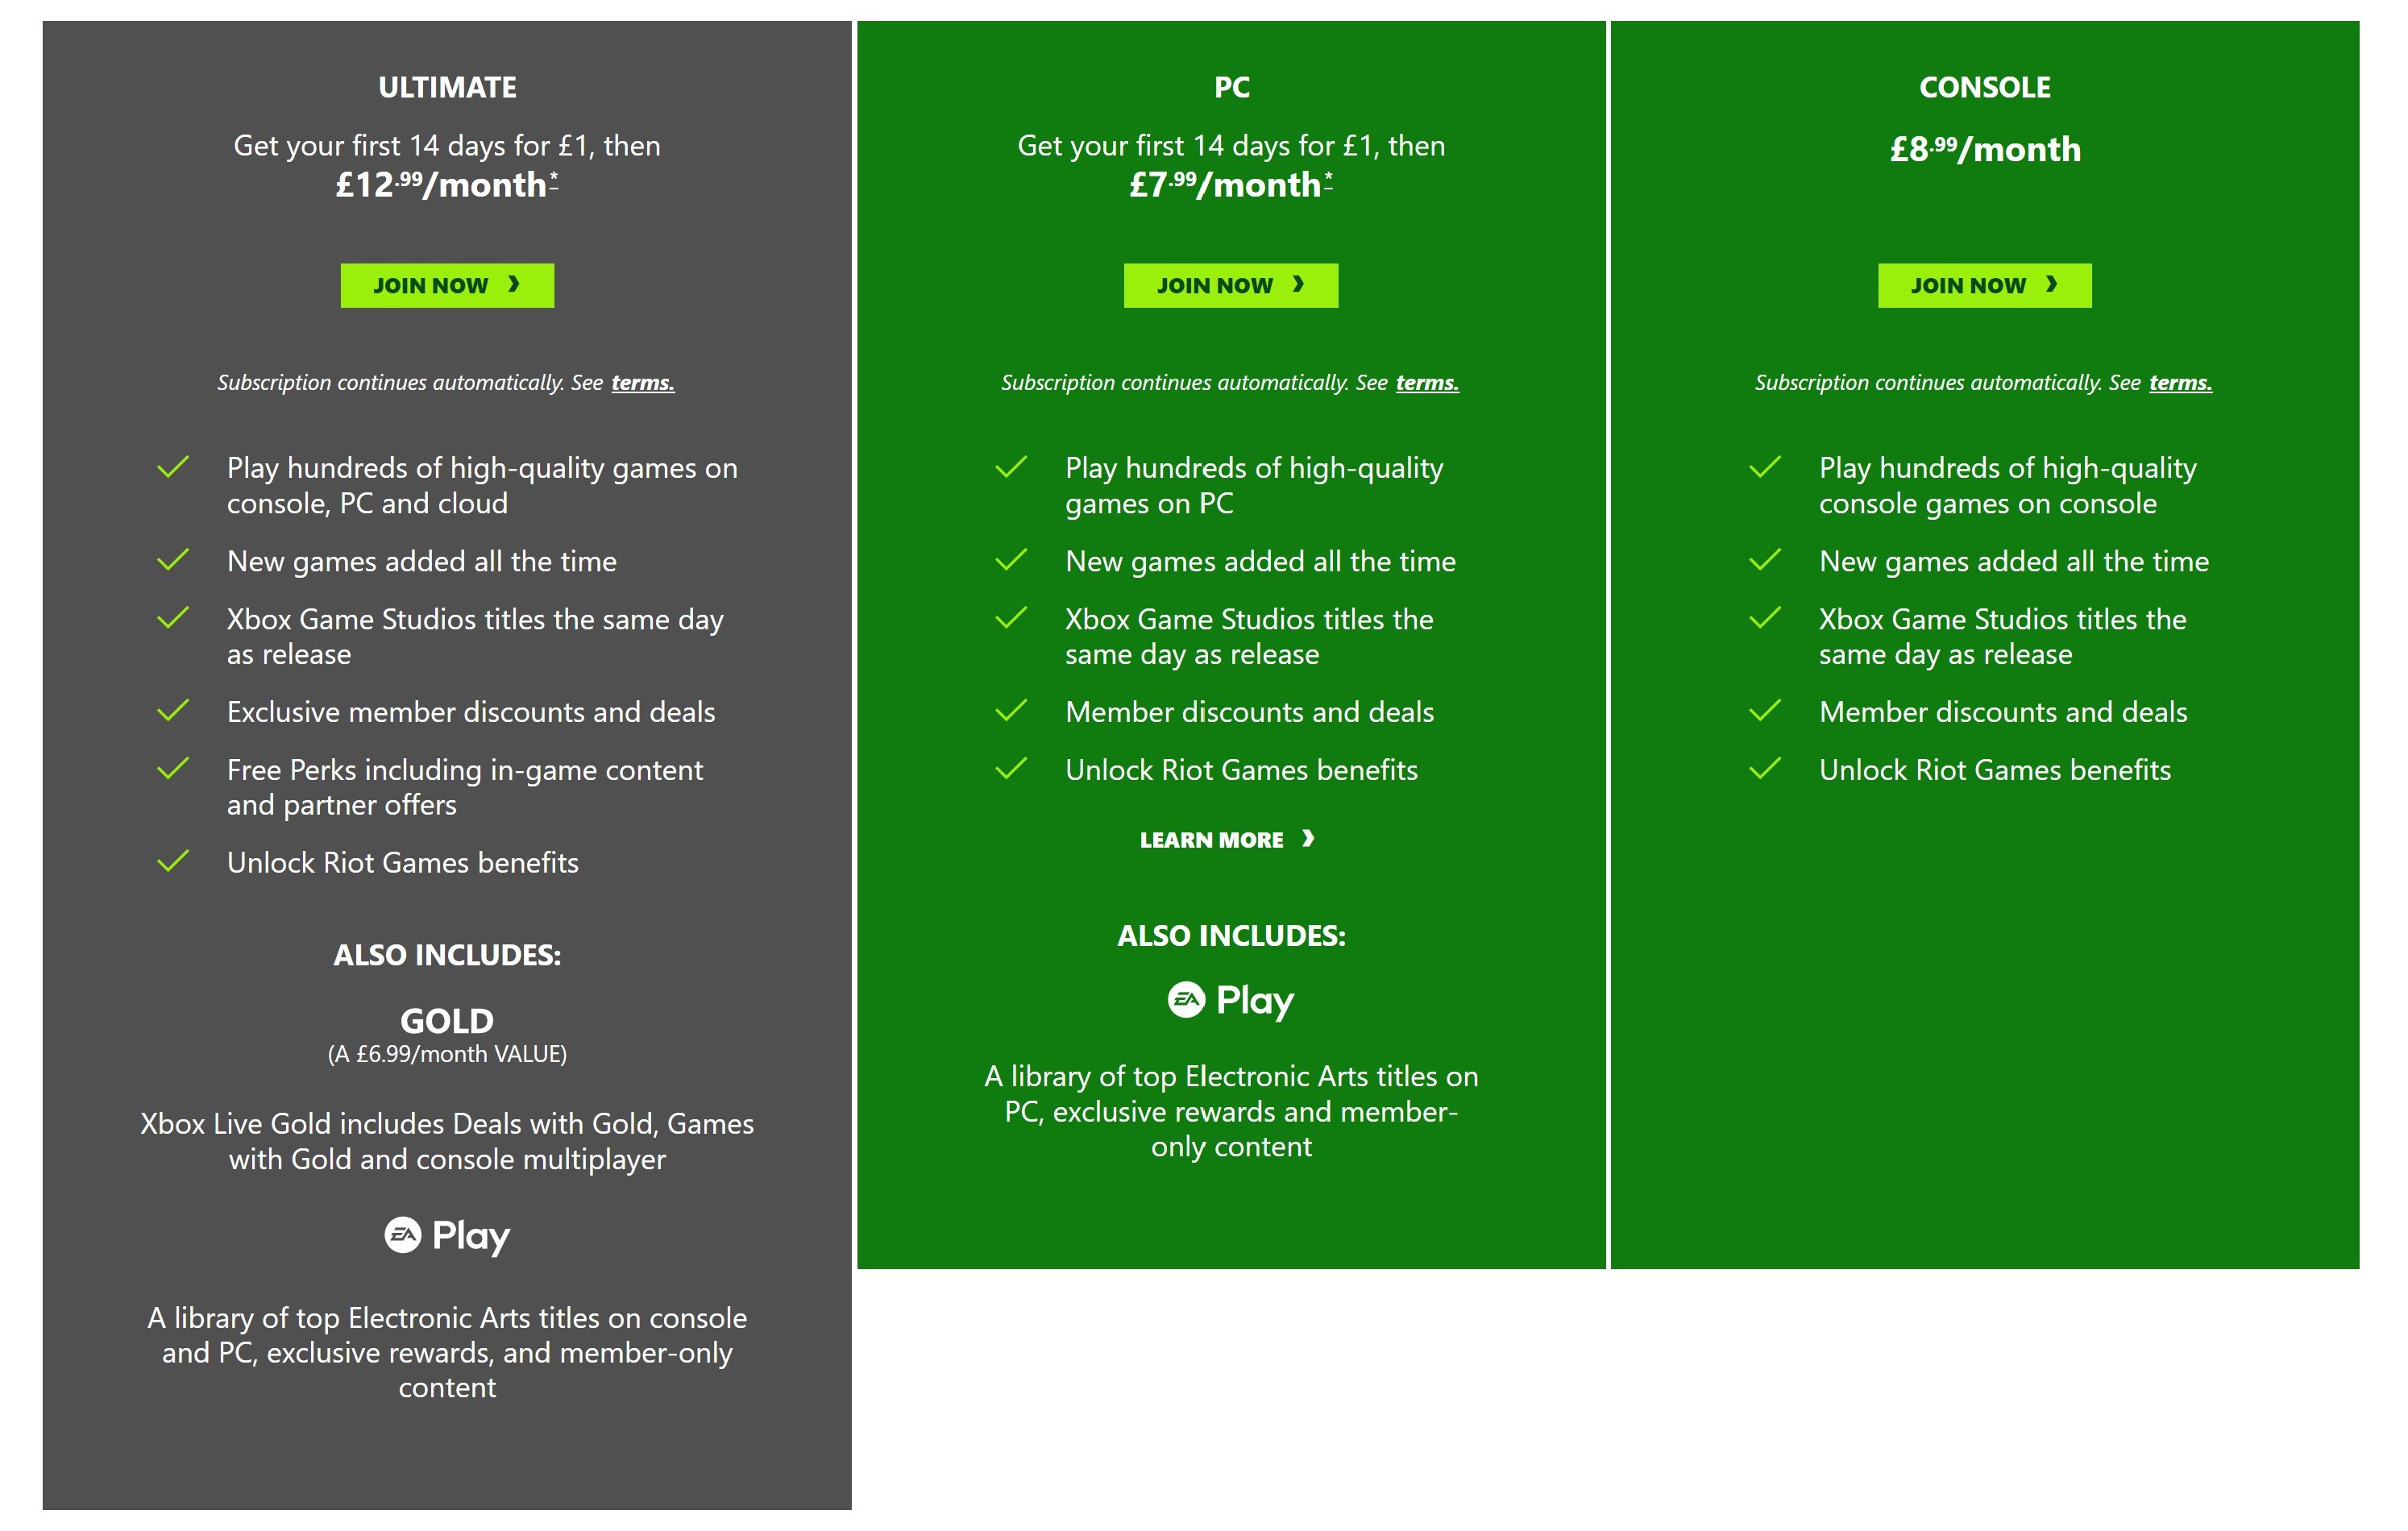 Xbox Game Pass Core 1 Month Membership Trial